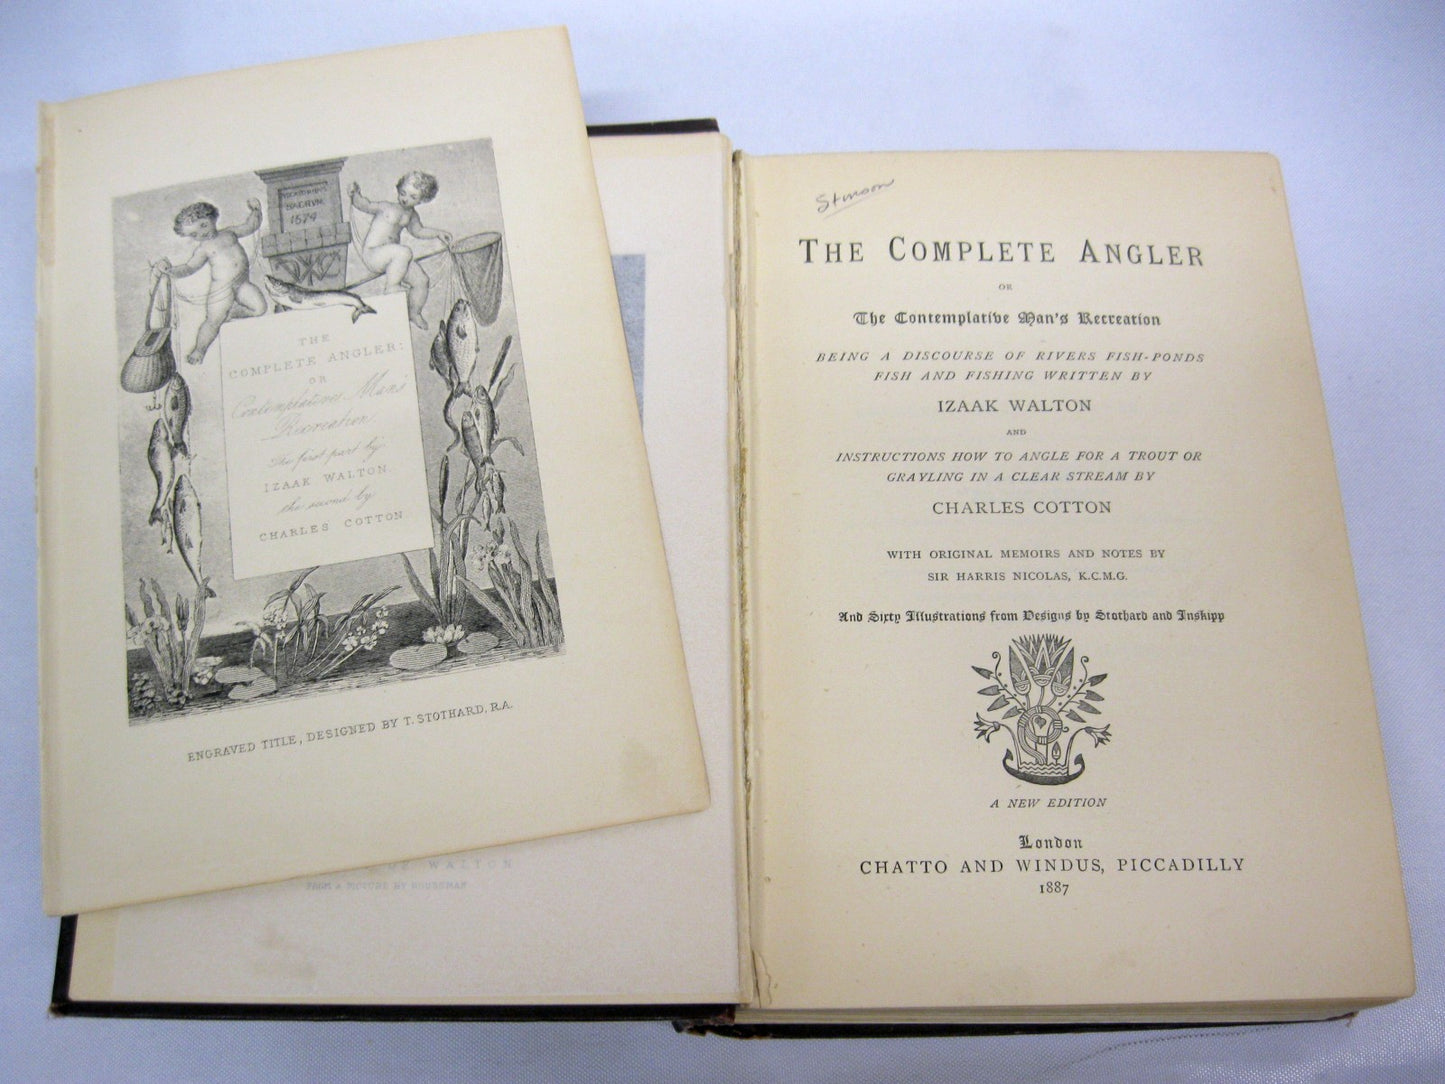 The Complete Angler by Izaak Walton & Charles Cotton